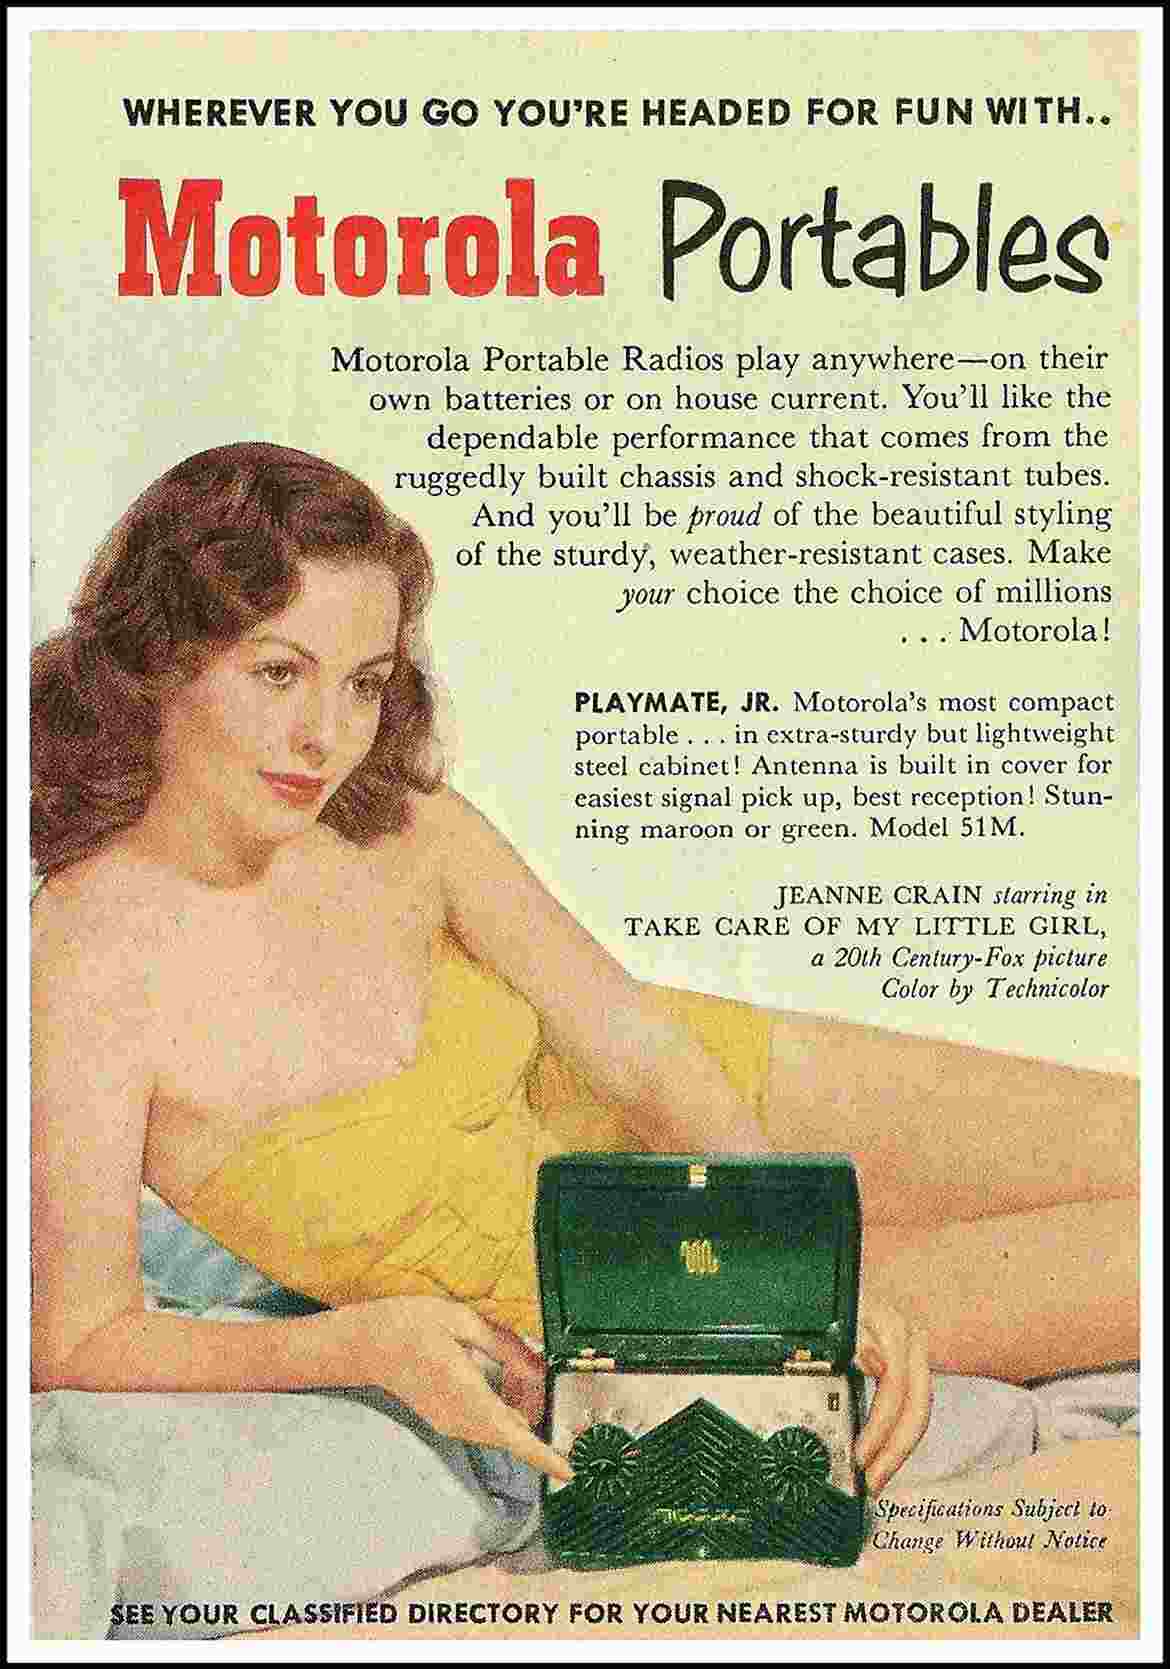 1024Px Advertising For The Motorola Playmate, Jr. Portable Radio, Model 51M, In The Quick Pocket News Weekly Magazine, Vol. 4, No. 24, June 11, 1951 (37269788085)